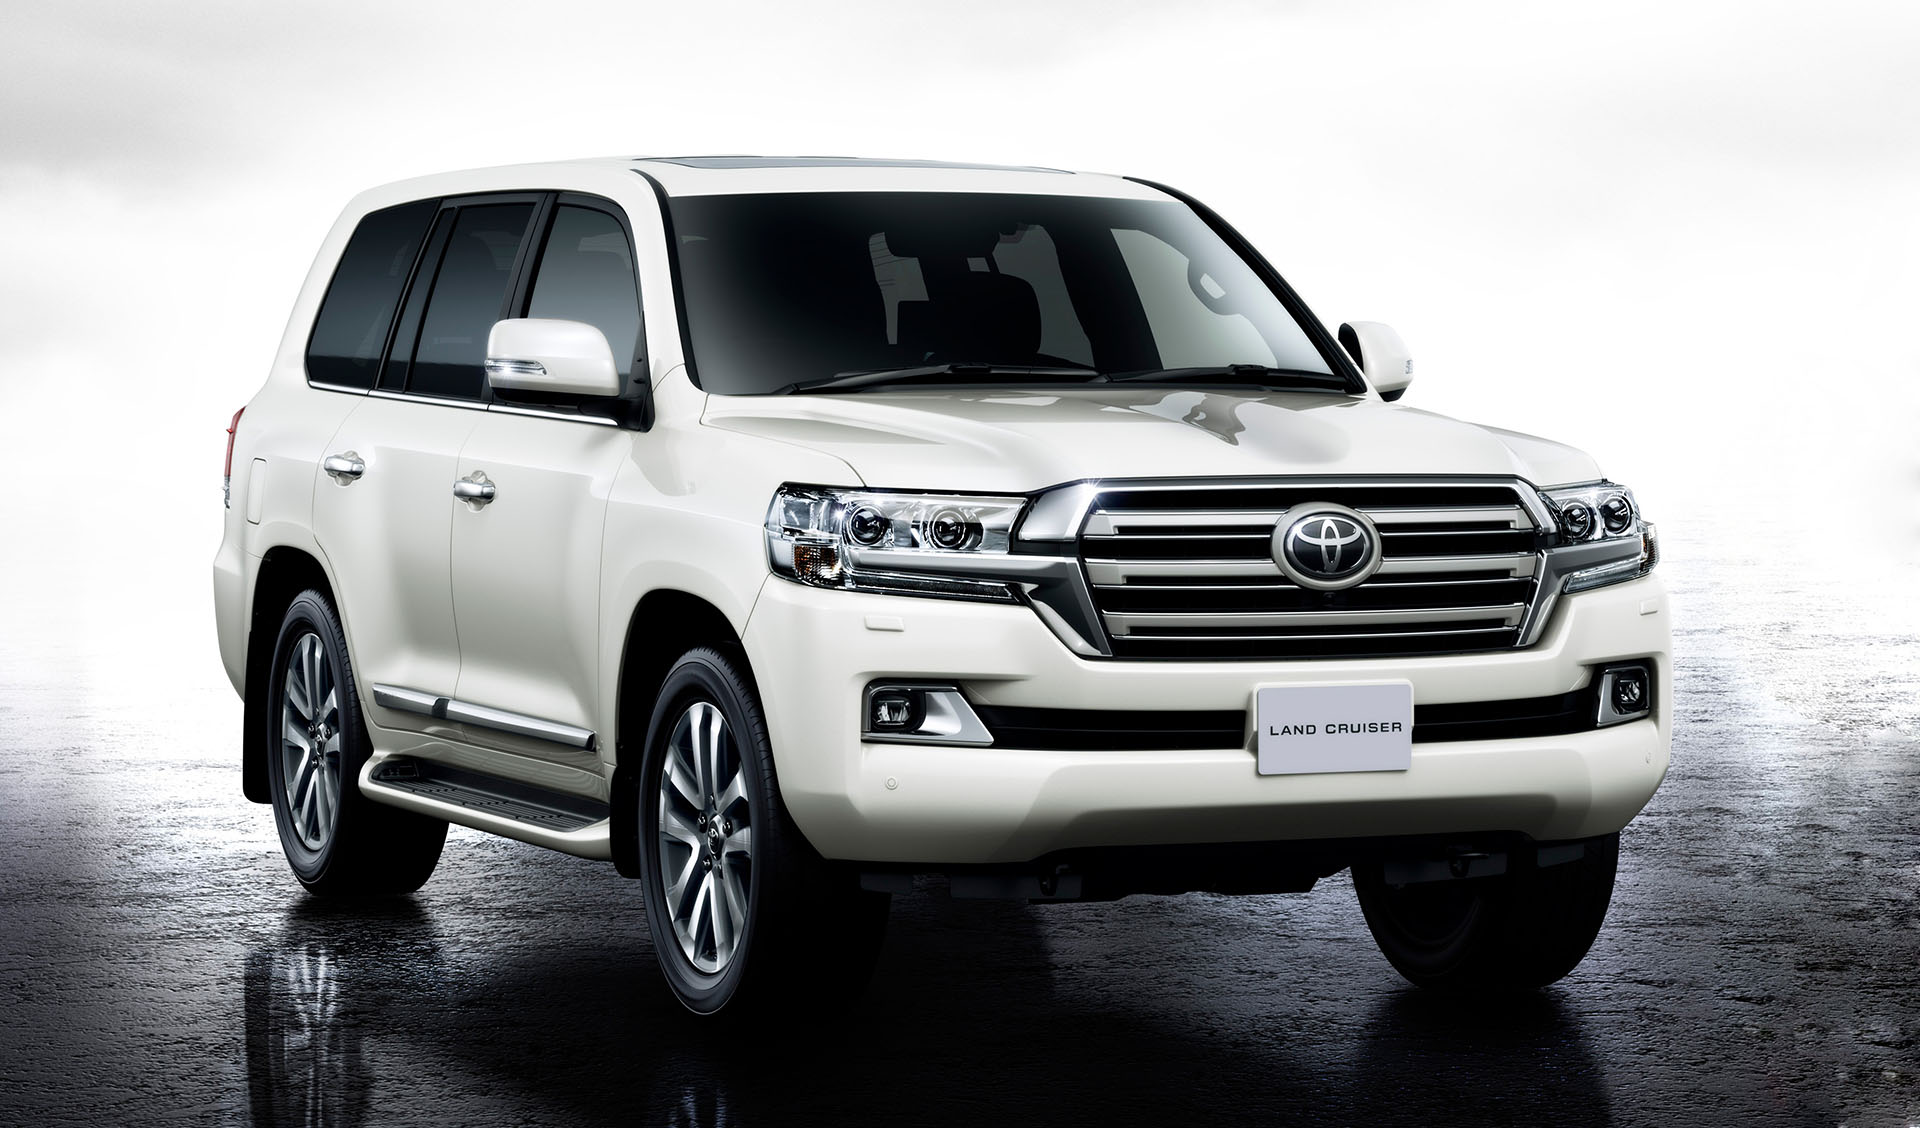 Land Cruiser V8 2019 Price in Pakistan Specs Features